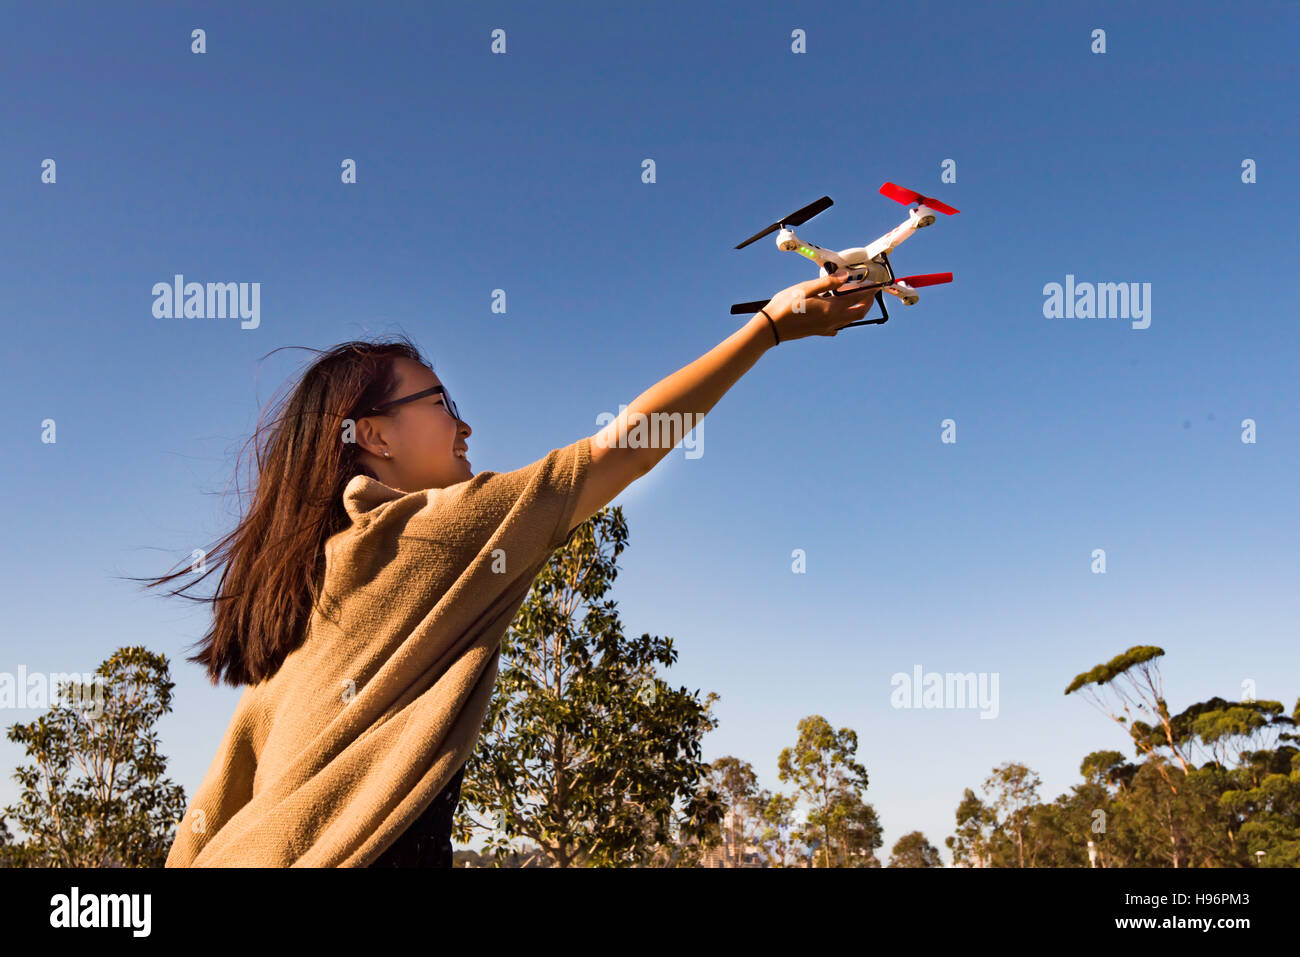 Two people in a Sydney park playing with a drone Stock Photo